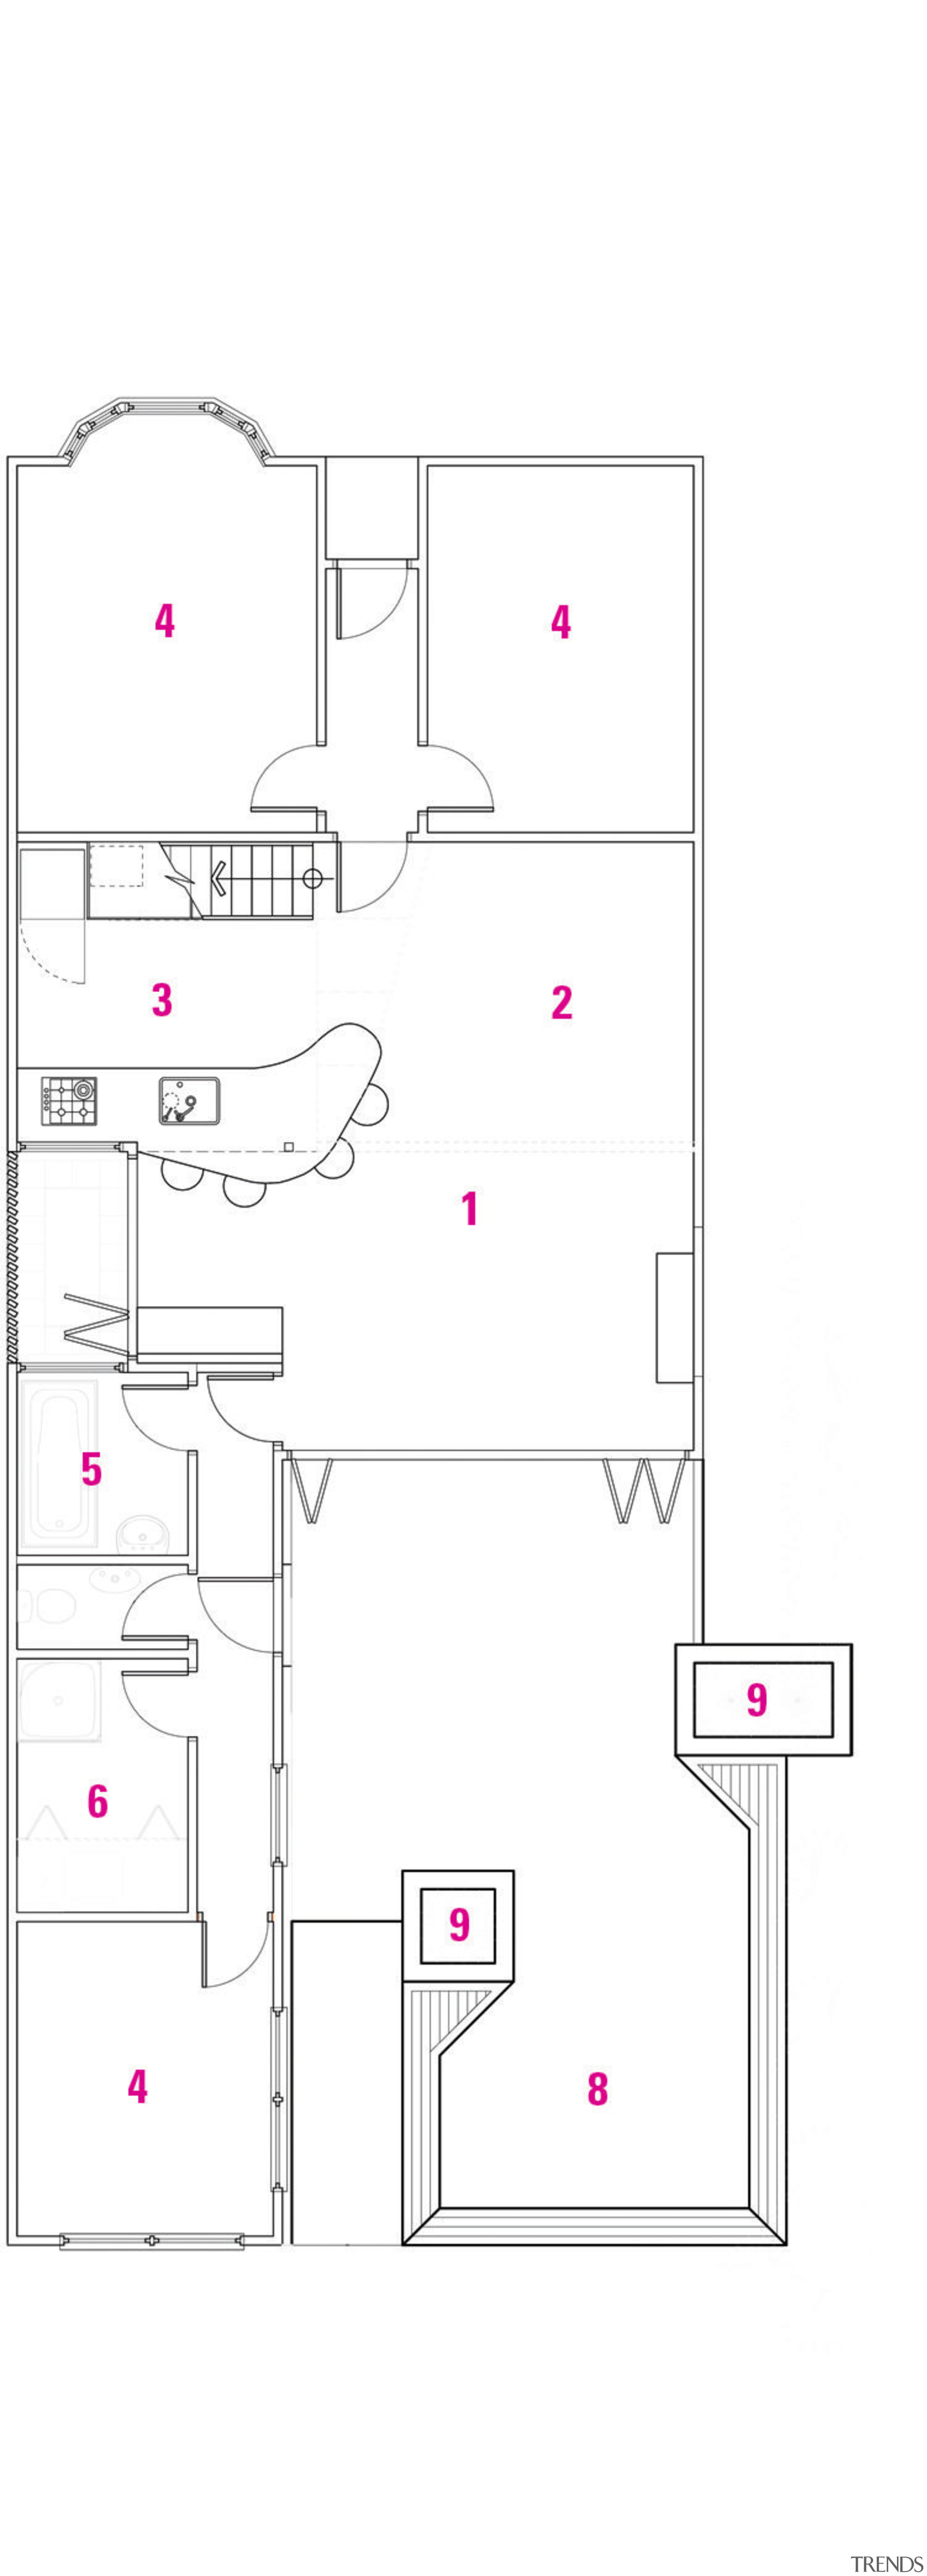 Floorplan of the house - Floorplan of the area, design, diagram, drawing, floor plan, line, product, product design, purple, white